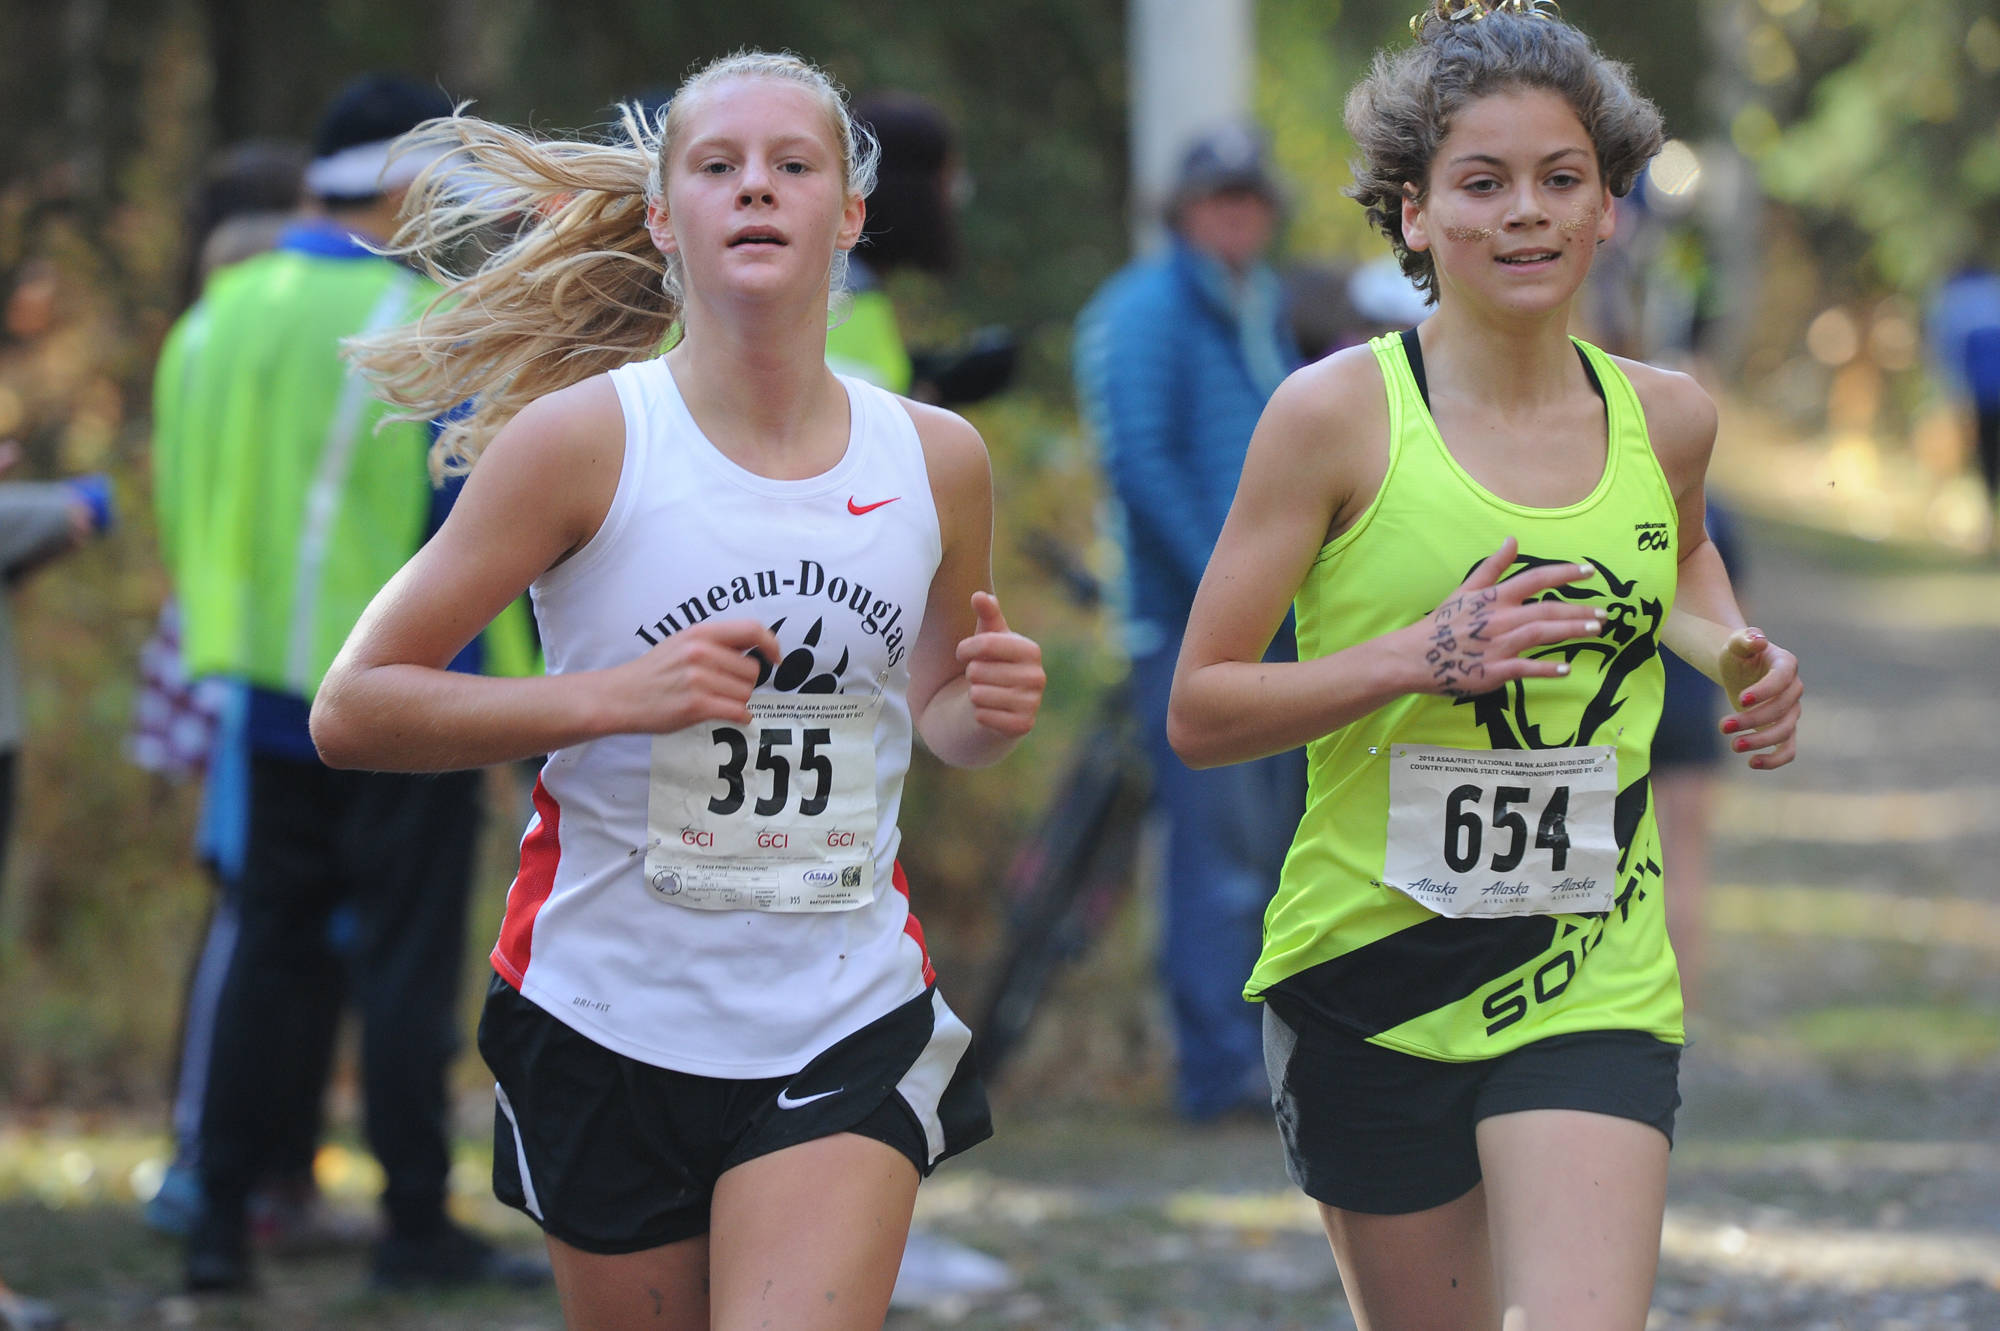 Juneau-Douglas’ Sadie Tuckwood leads South Anchorage’s Ava Earl in the ASAA/First National Bank Alaska Division I girls state cross country meet at the Bartlett High School running trails on Saturday. (Michael Dinneen | For the Juneau Empire)